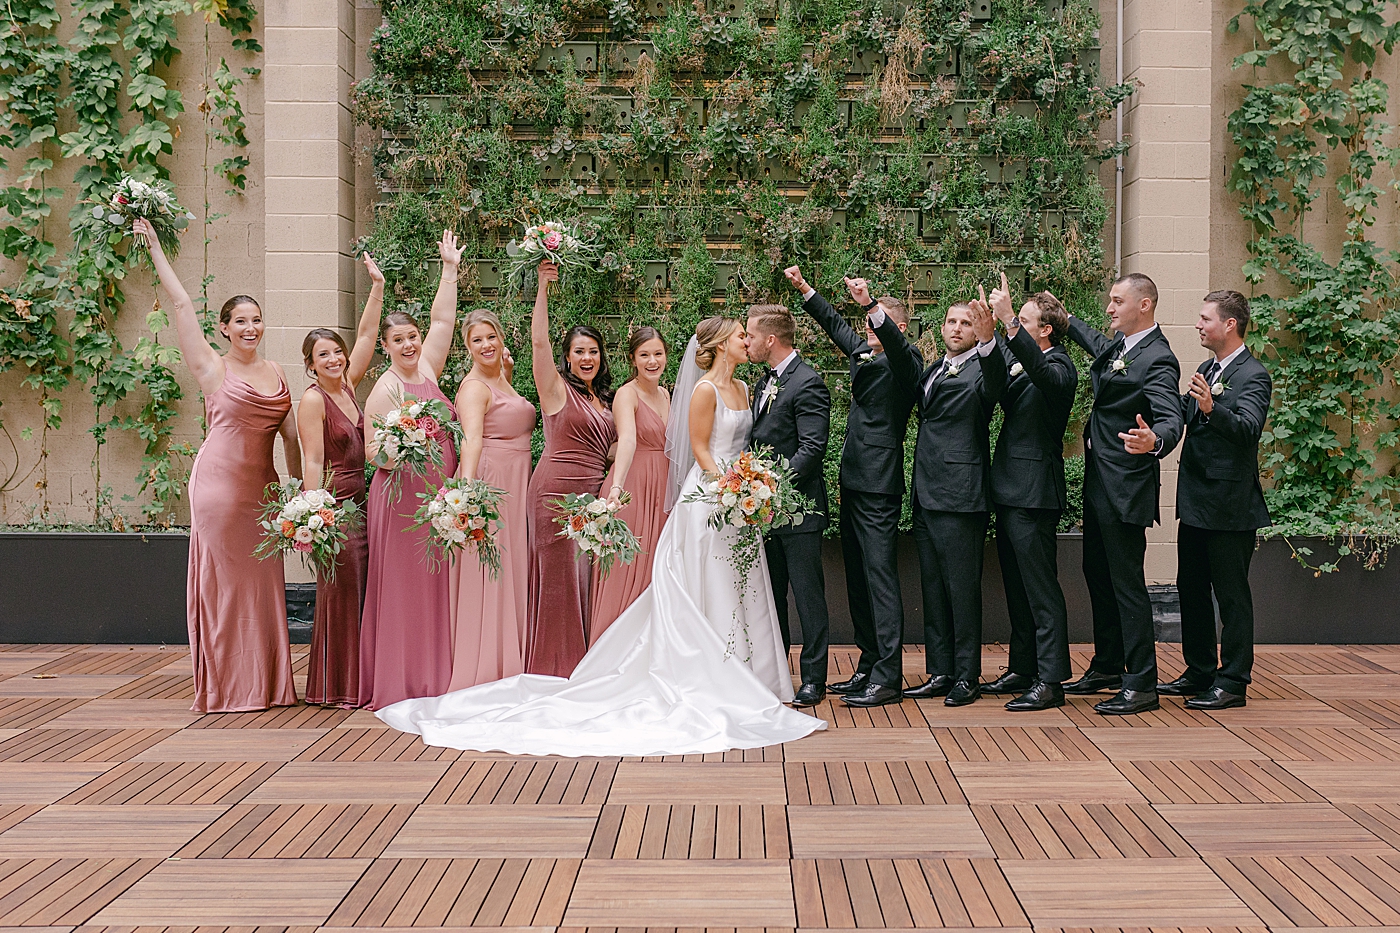 Wedding party cheering as bride and groom kiss | Excelsior PA Wedding Photography by Hope Helmuth Photography